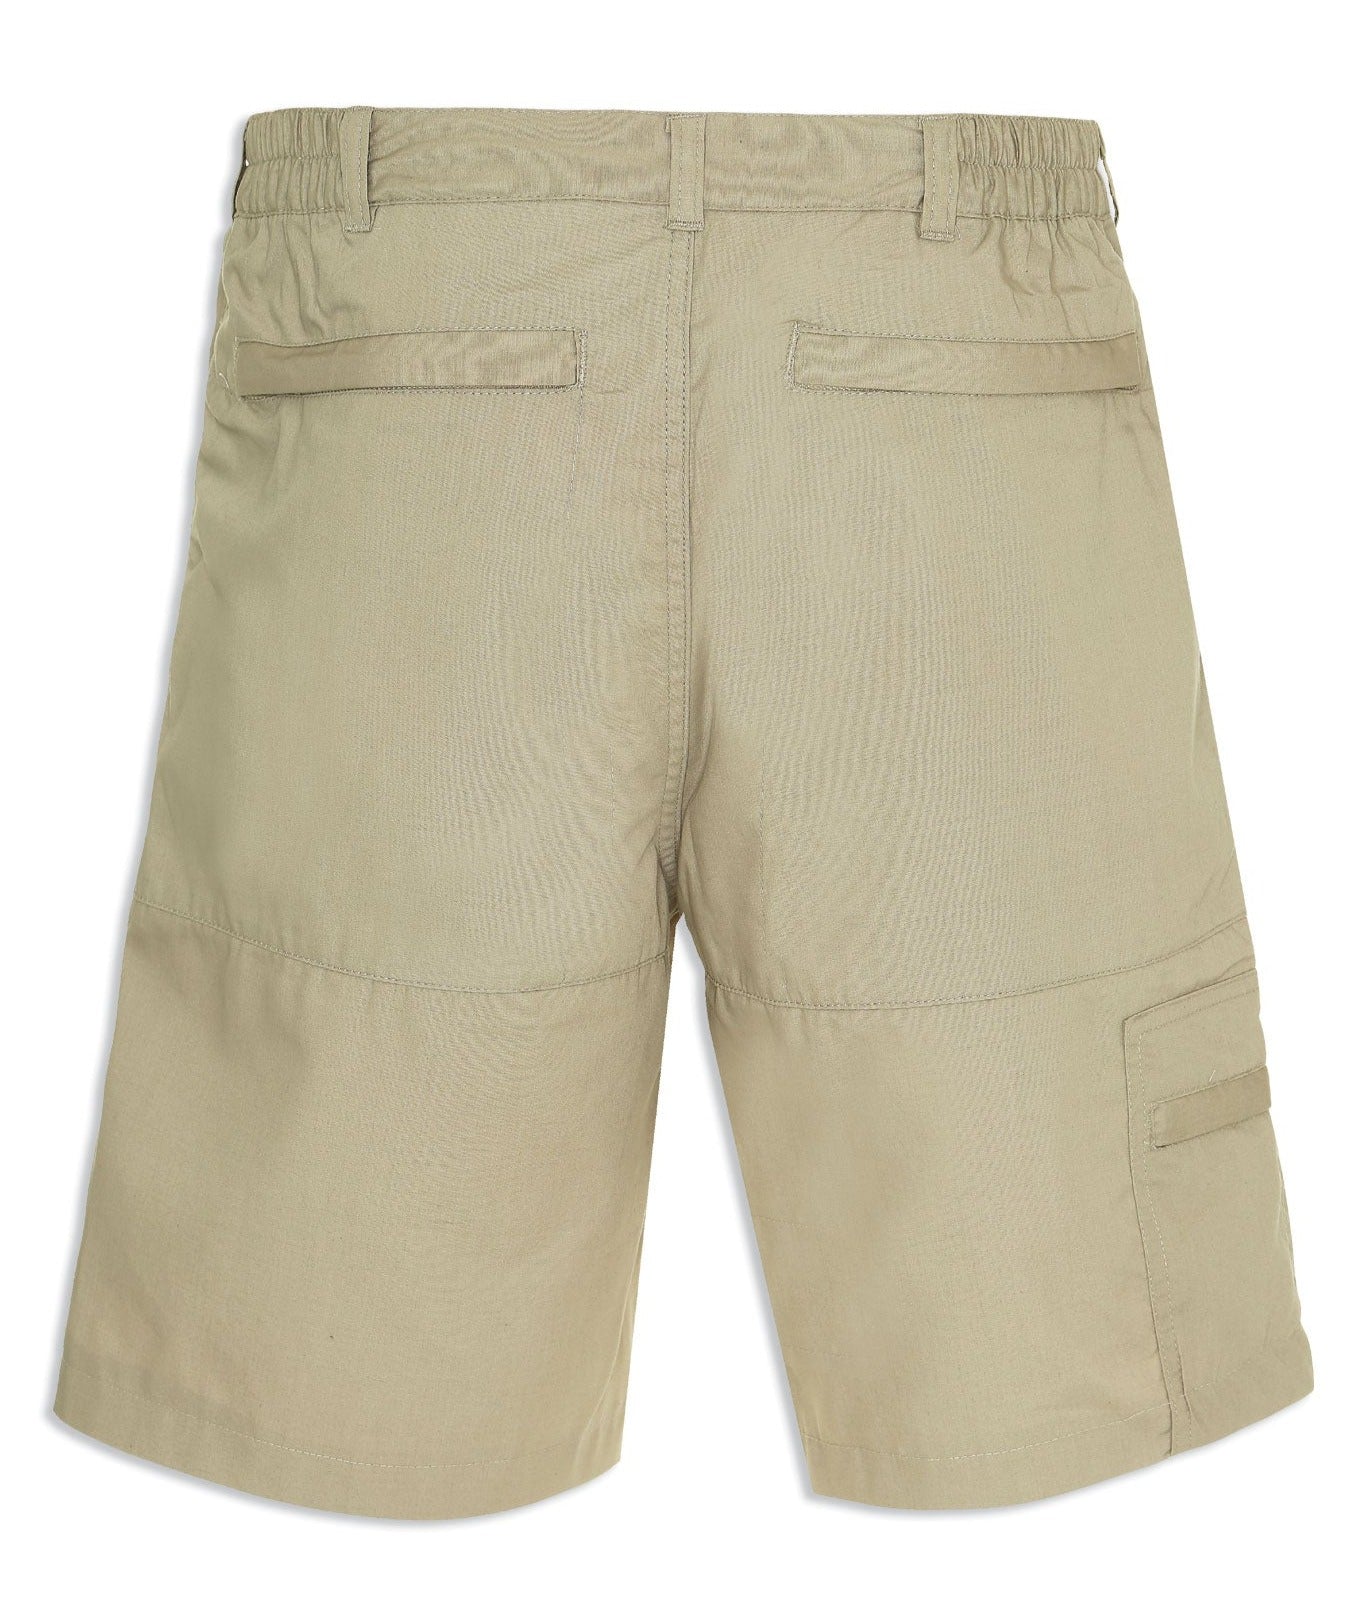 Stone outdoor shorts in stone colour back pockets 